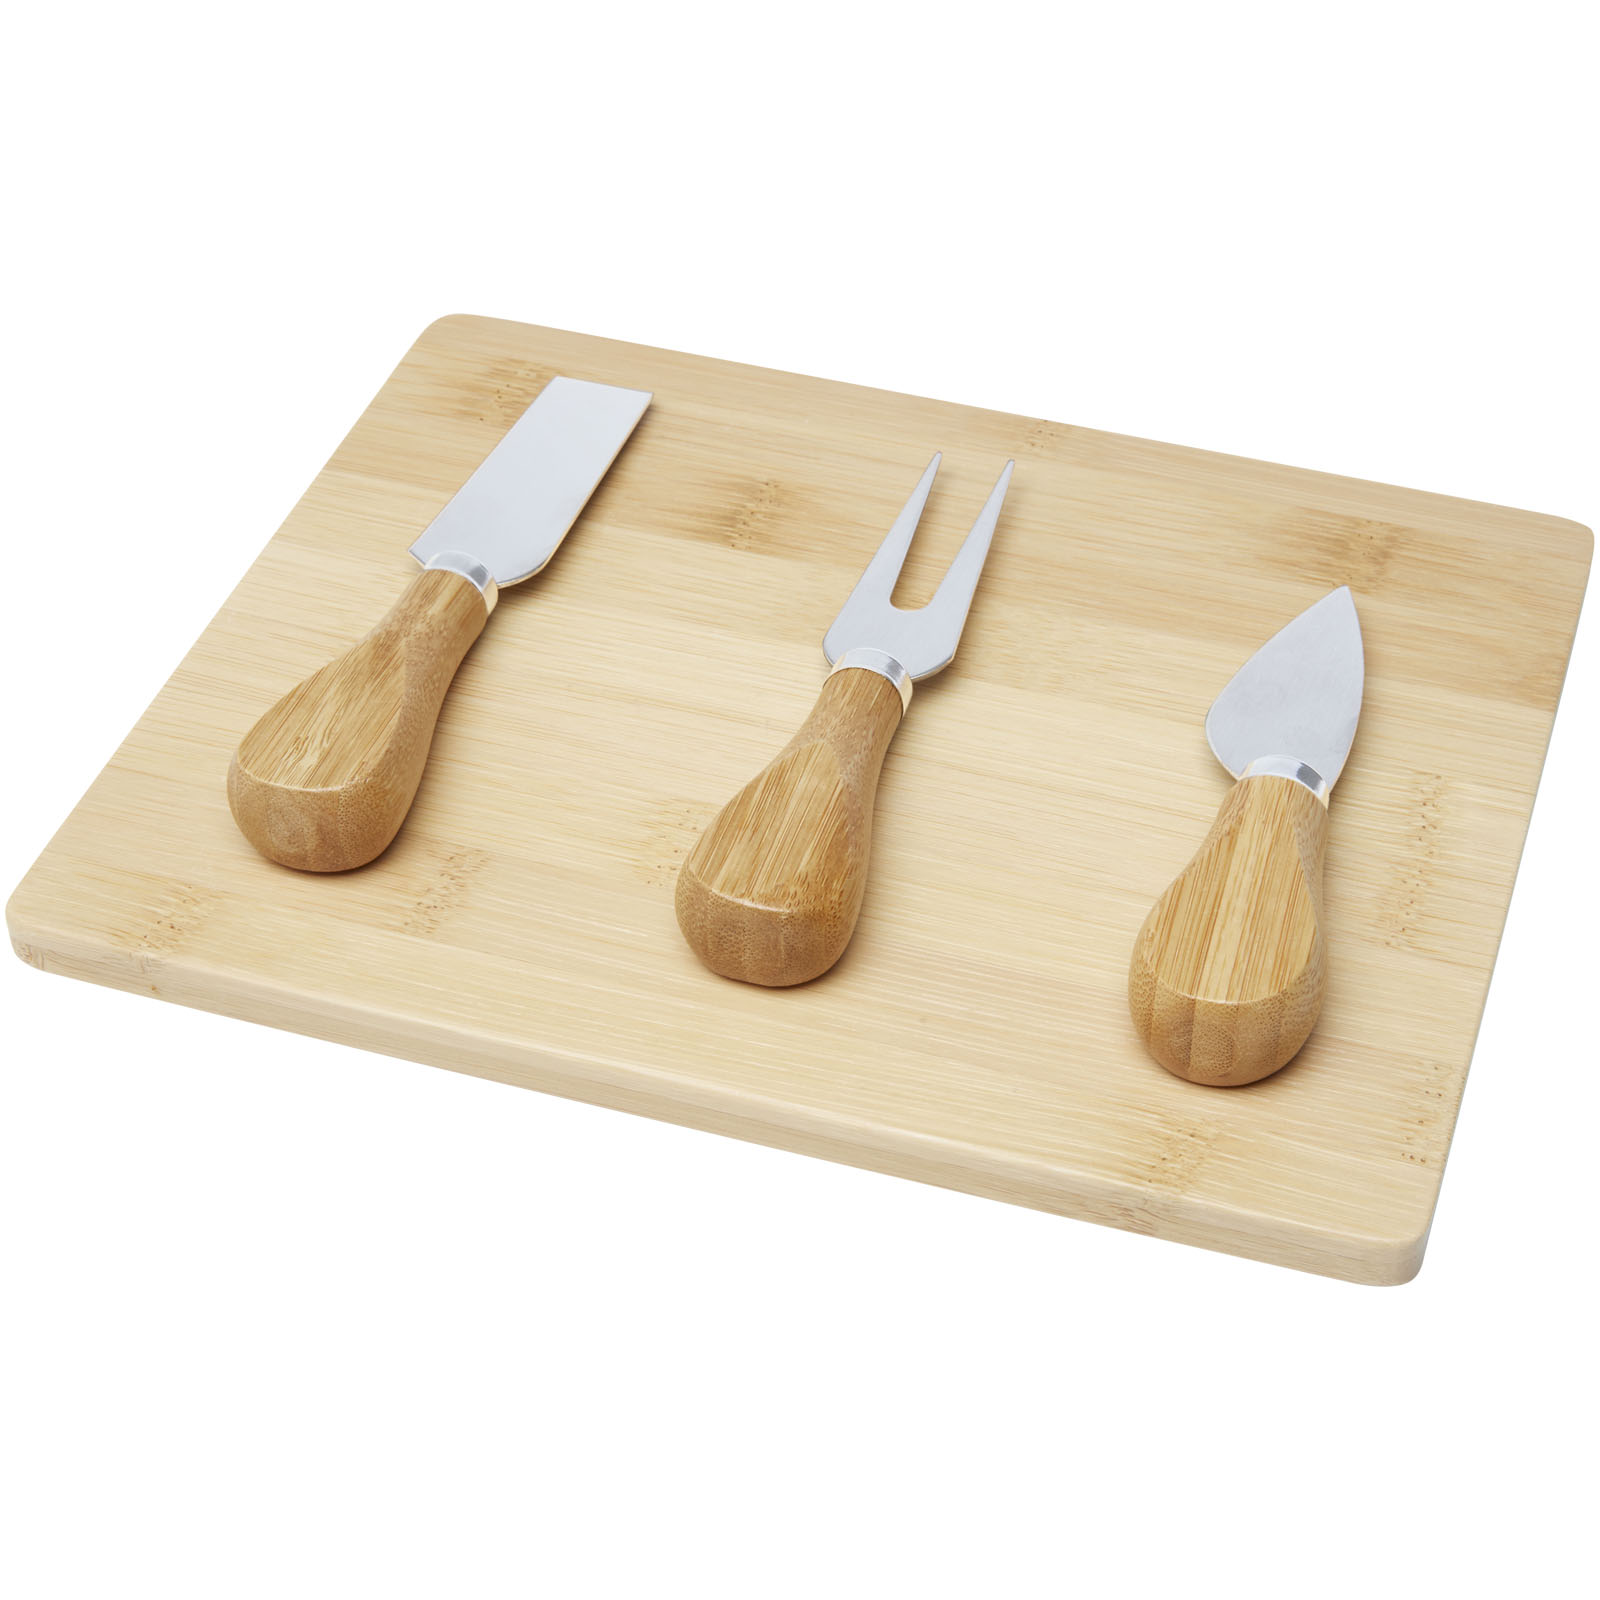 Advertising Serving Sets - Ement bamboo cheese board and tools